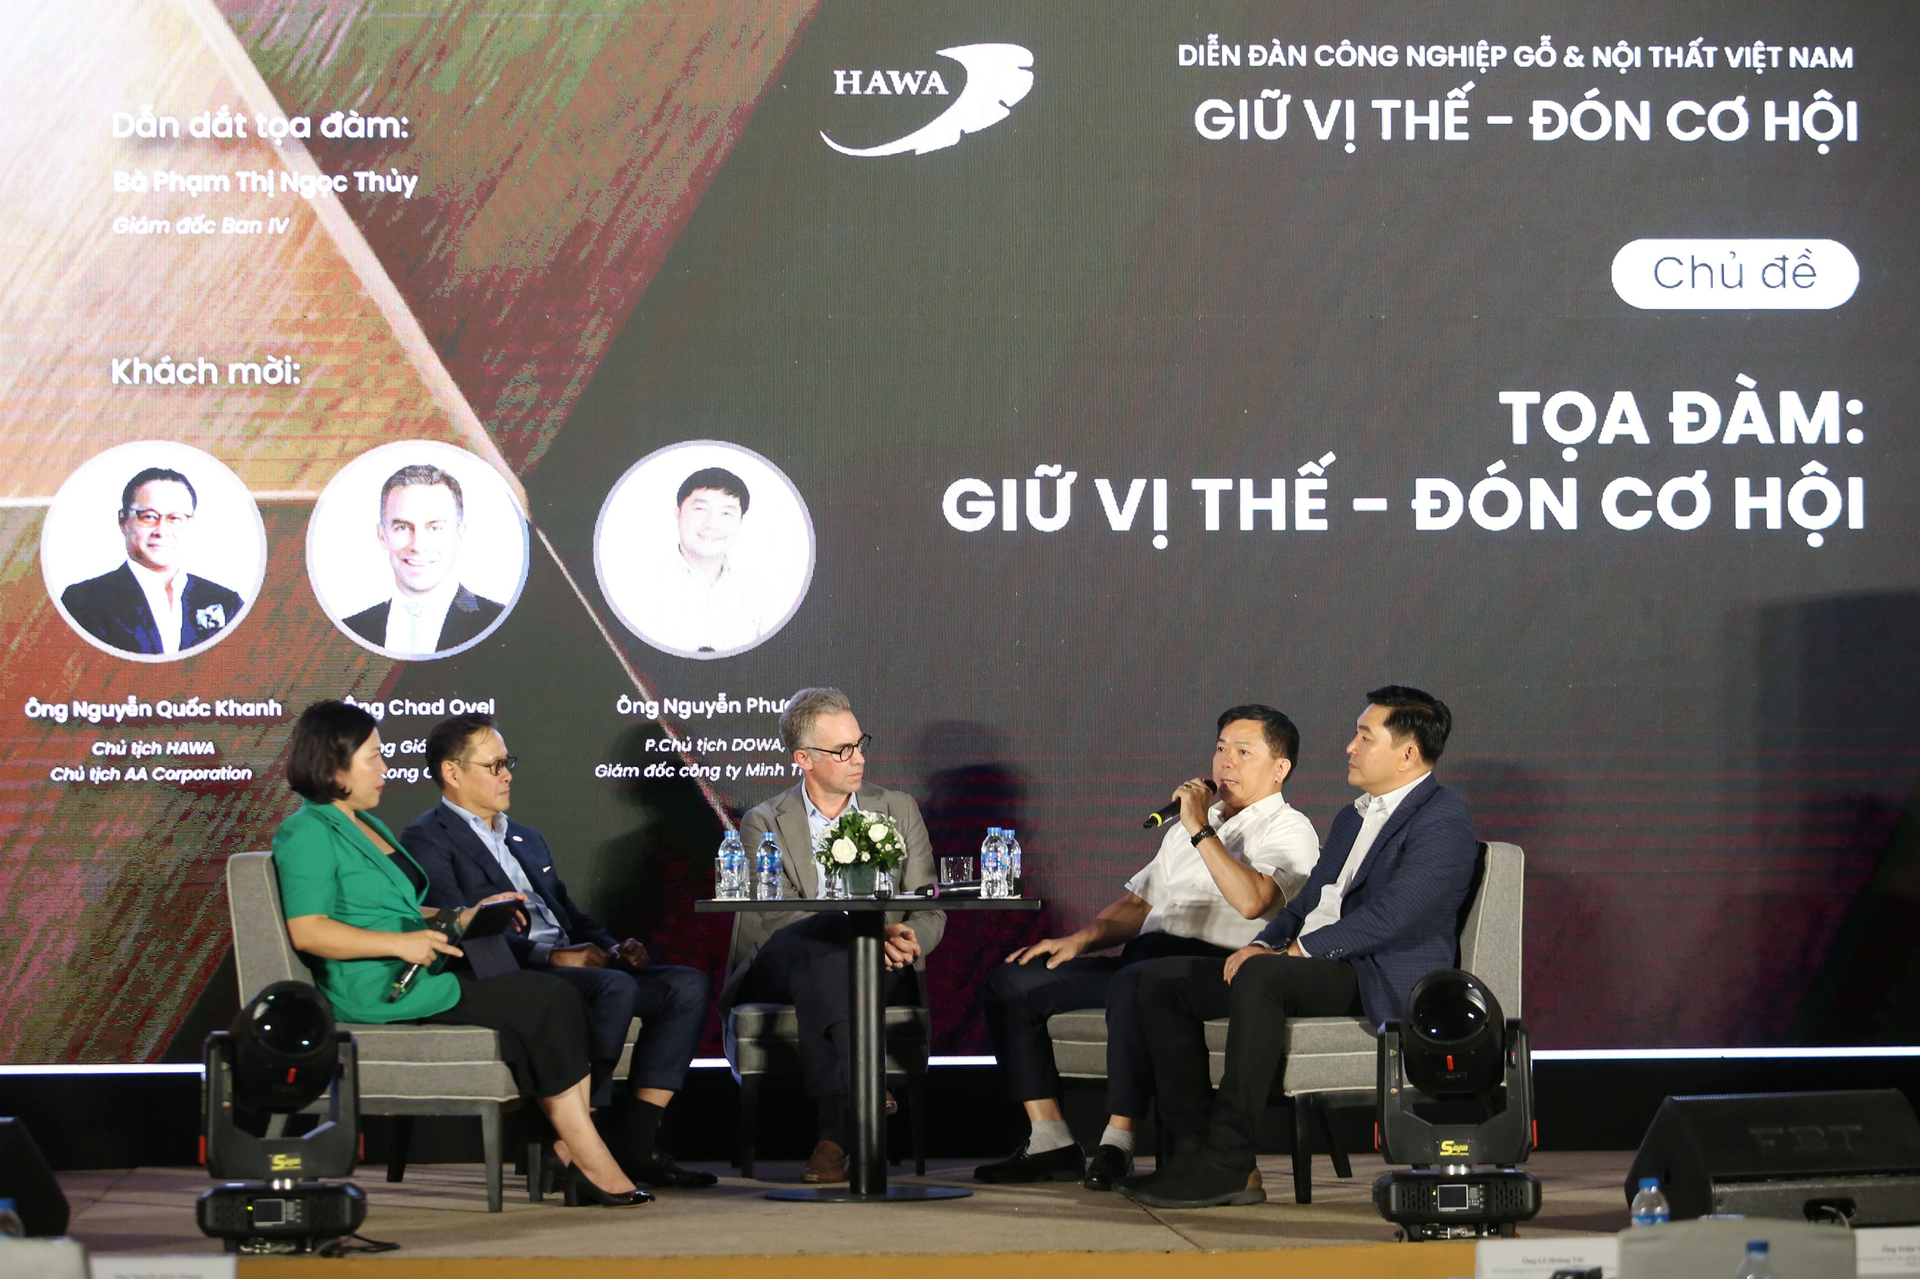 Overview of the Vietnam Wood and Furniture Industry Forum organized by the Handicraft and Wood Industry Association of Ho Chi Minh city (HAWA).